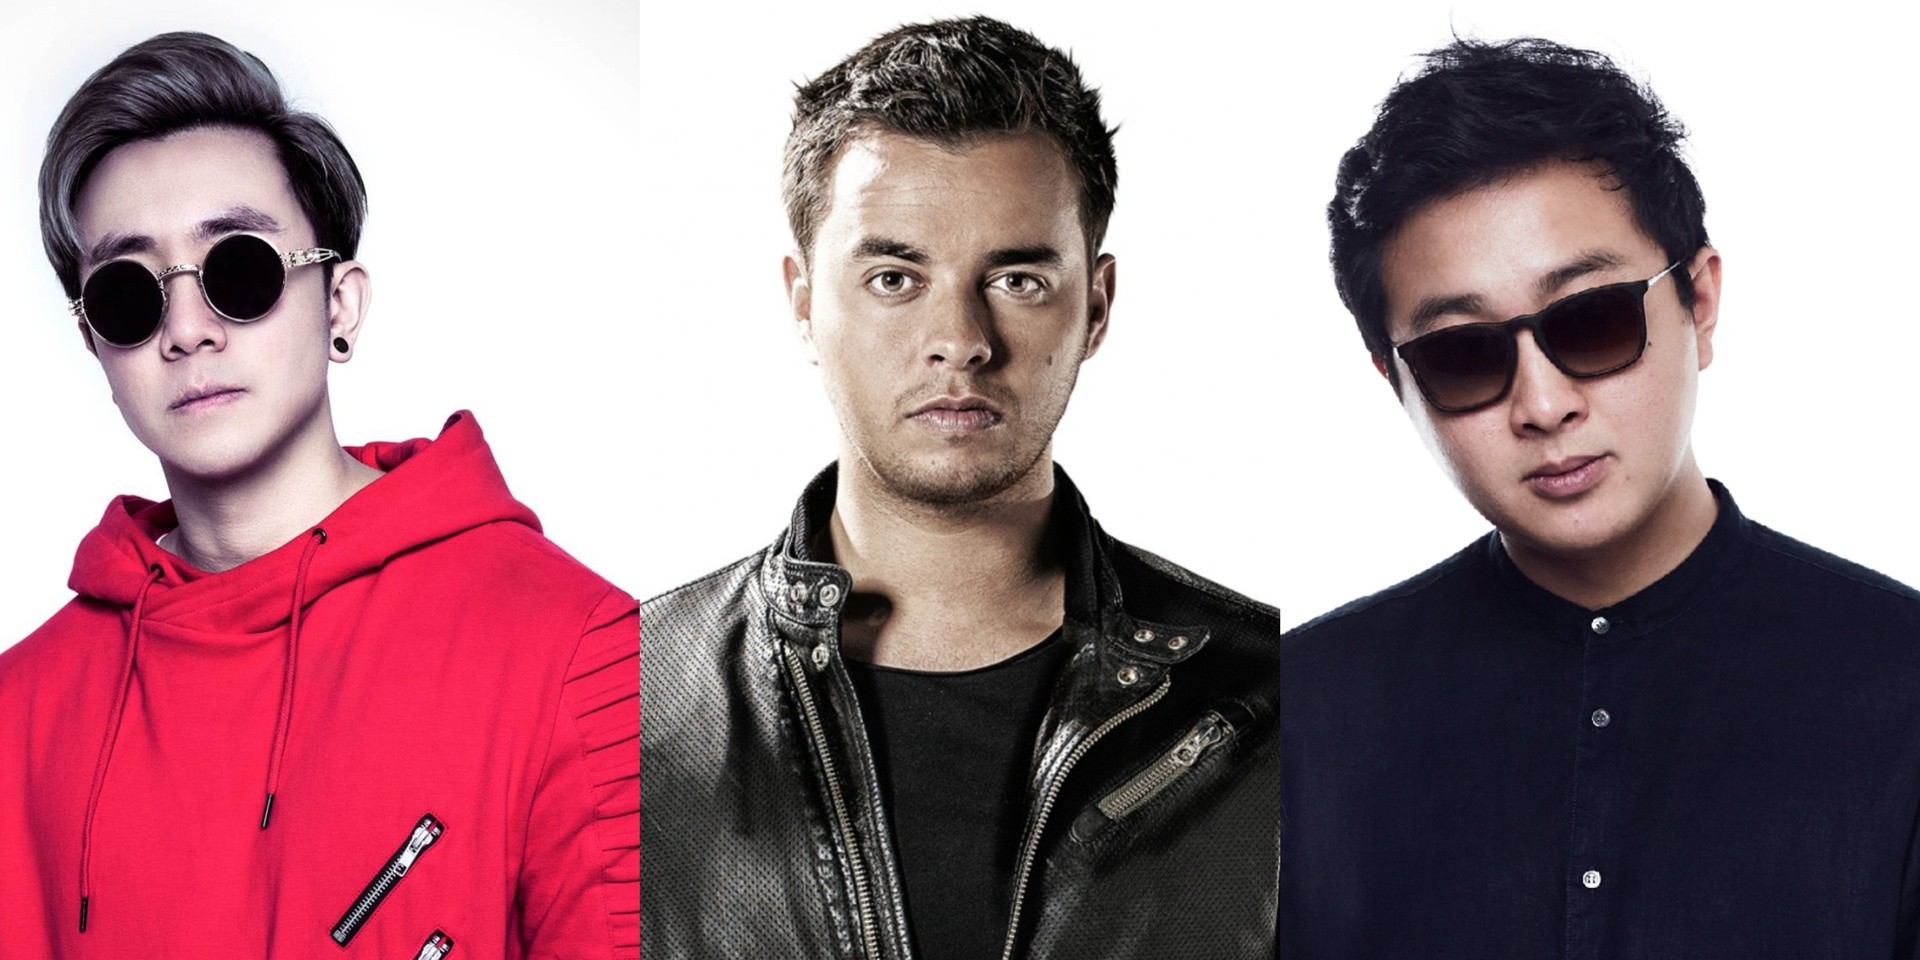 Quintino, Lincey, Inquisitive and more to perform at Songkran Music Festival in Singapore this April 